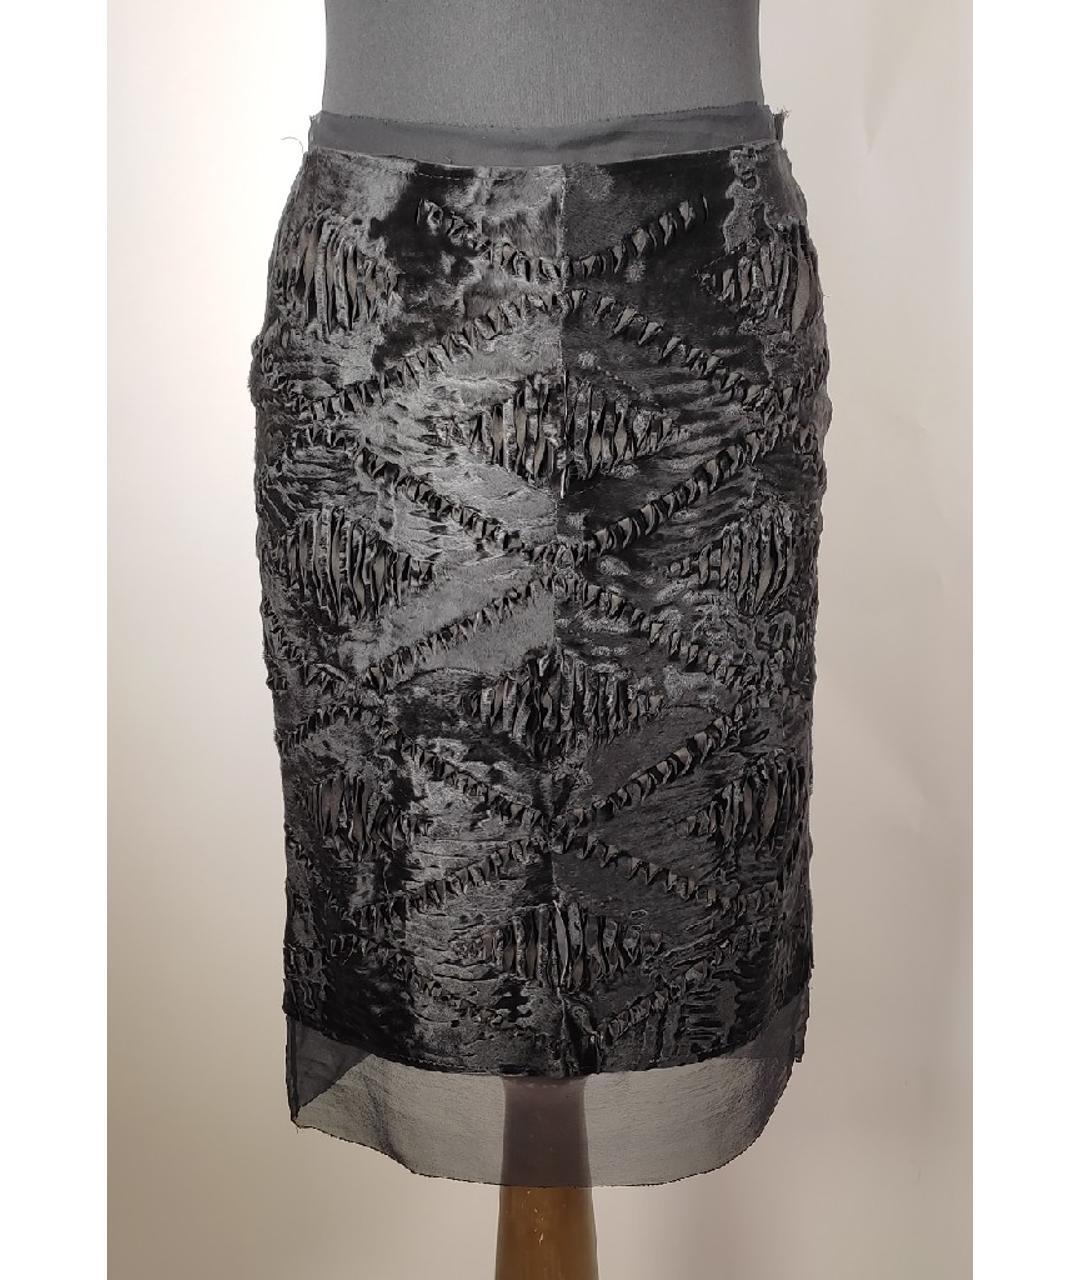 Gucci Black Skirt
Size: IT - 38, US - 4
Color: Black
Persian Lamb Fur
Made in Italy 
Excellent condition